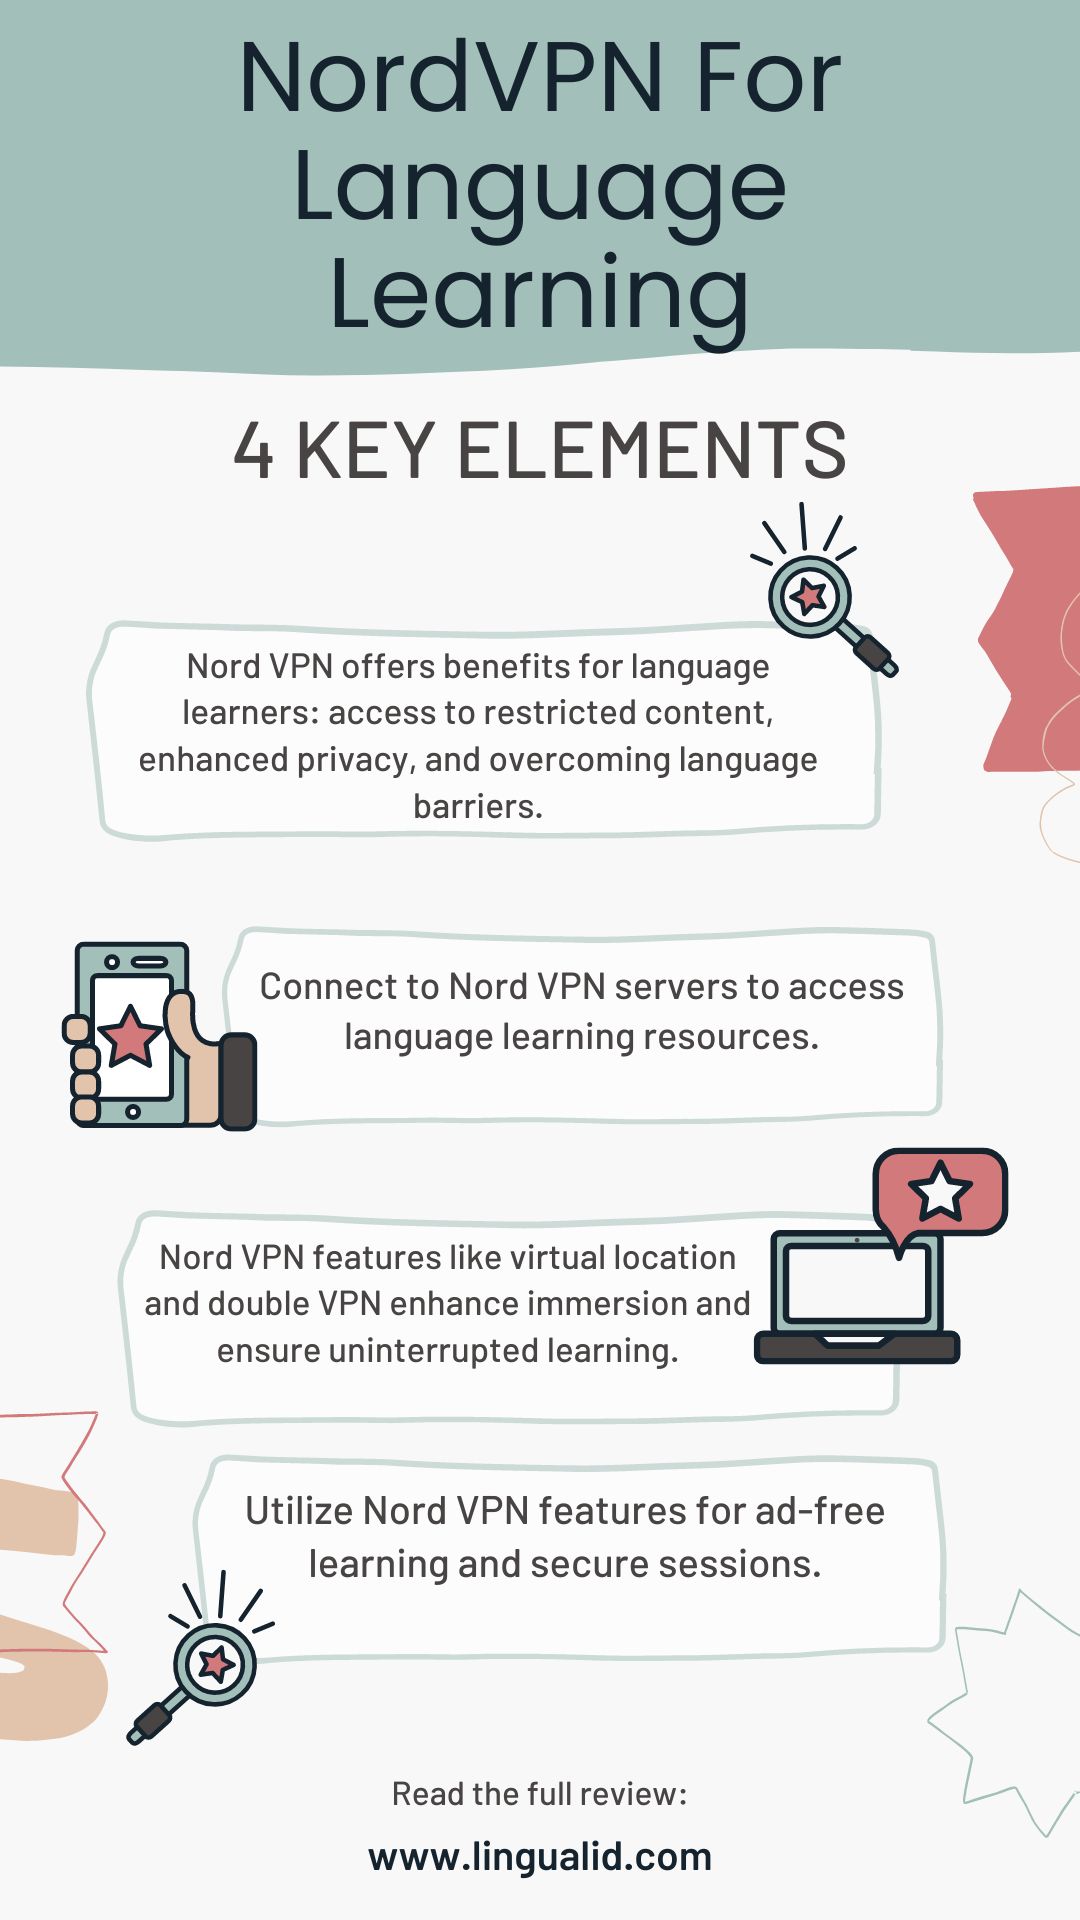 nordvpn for language learning